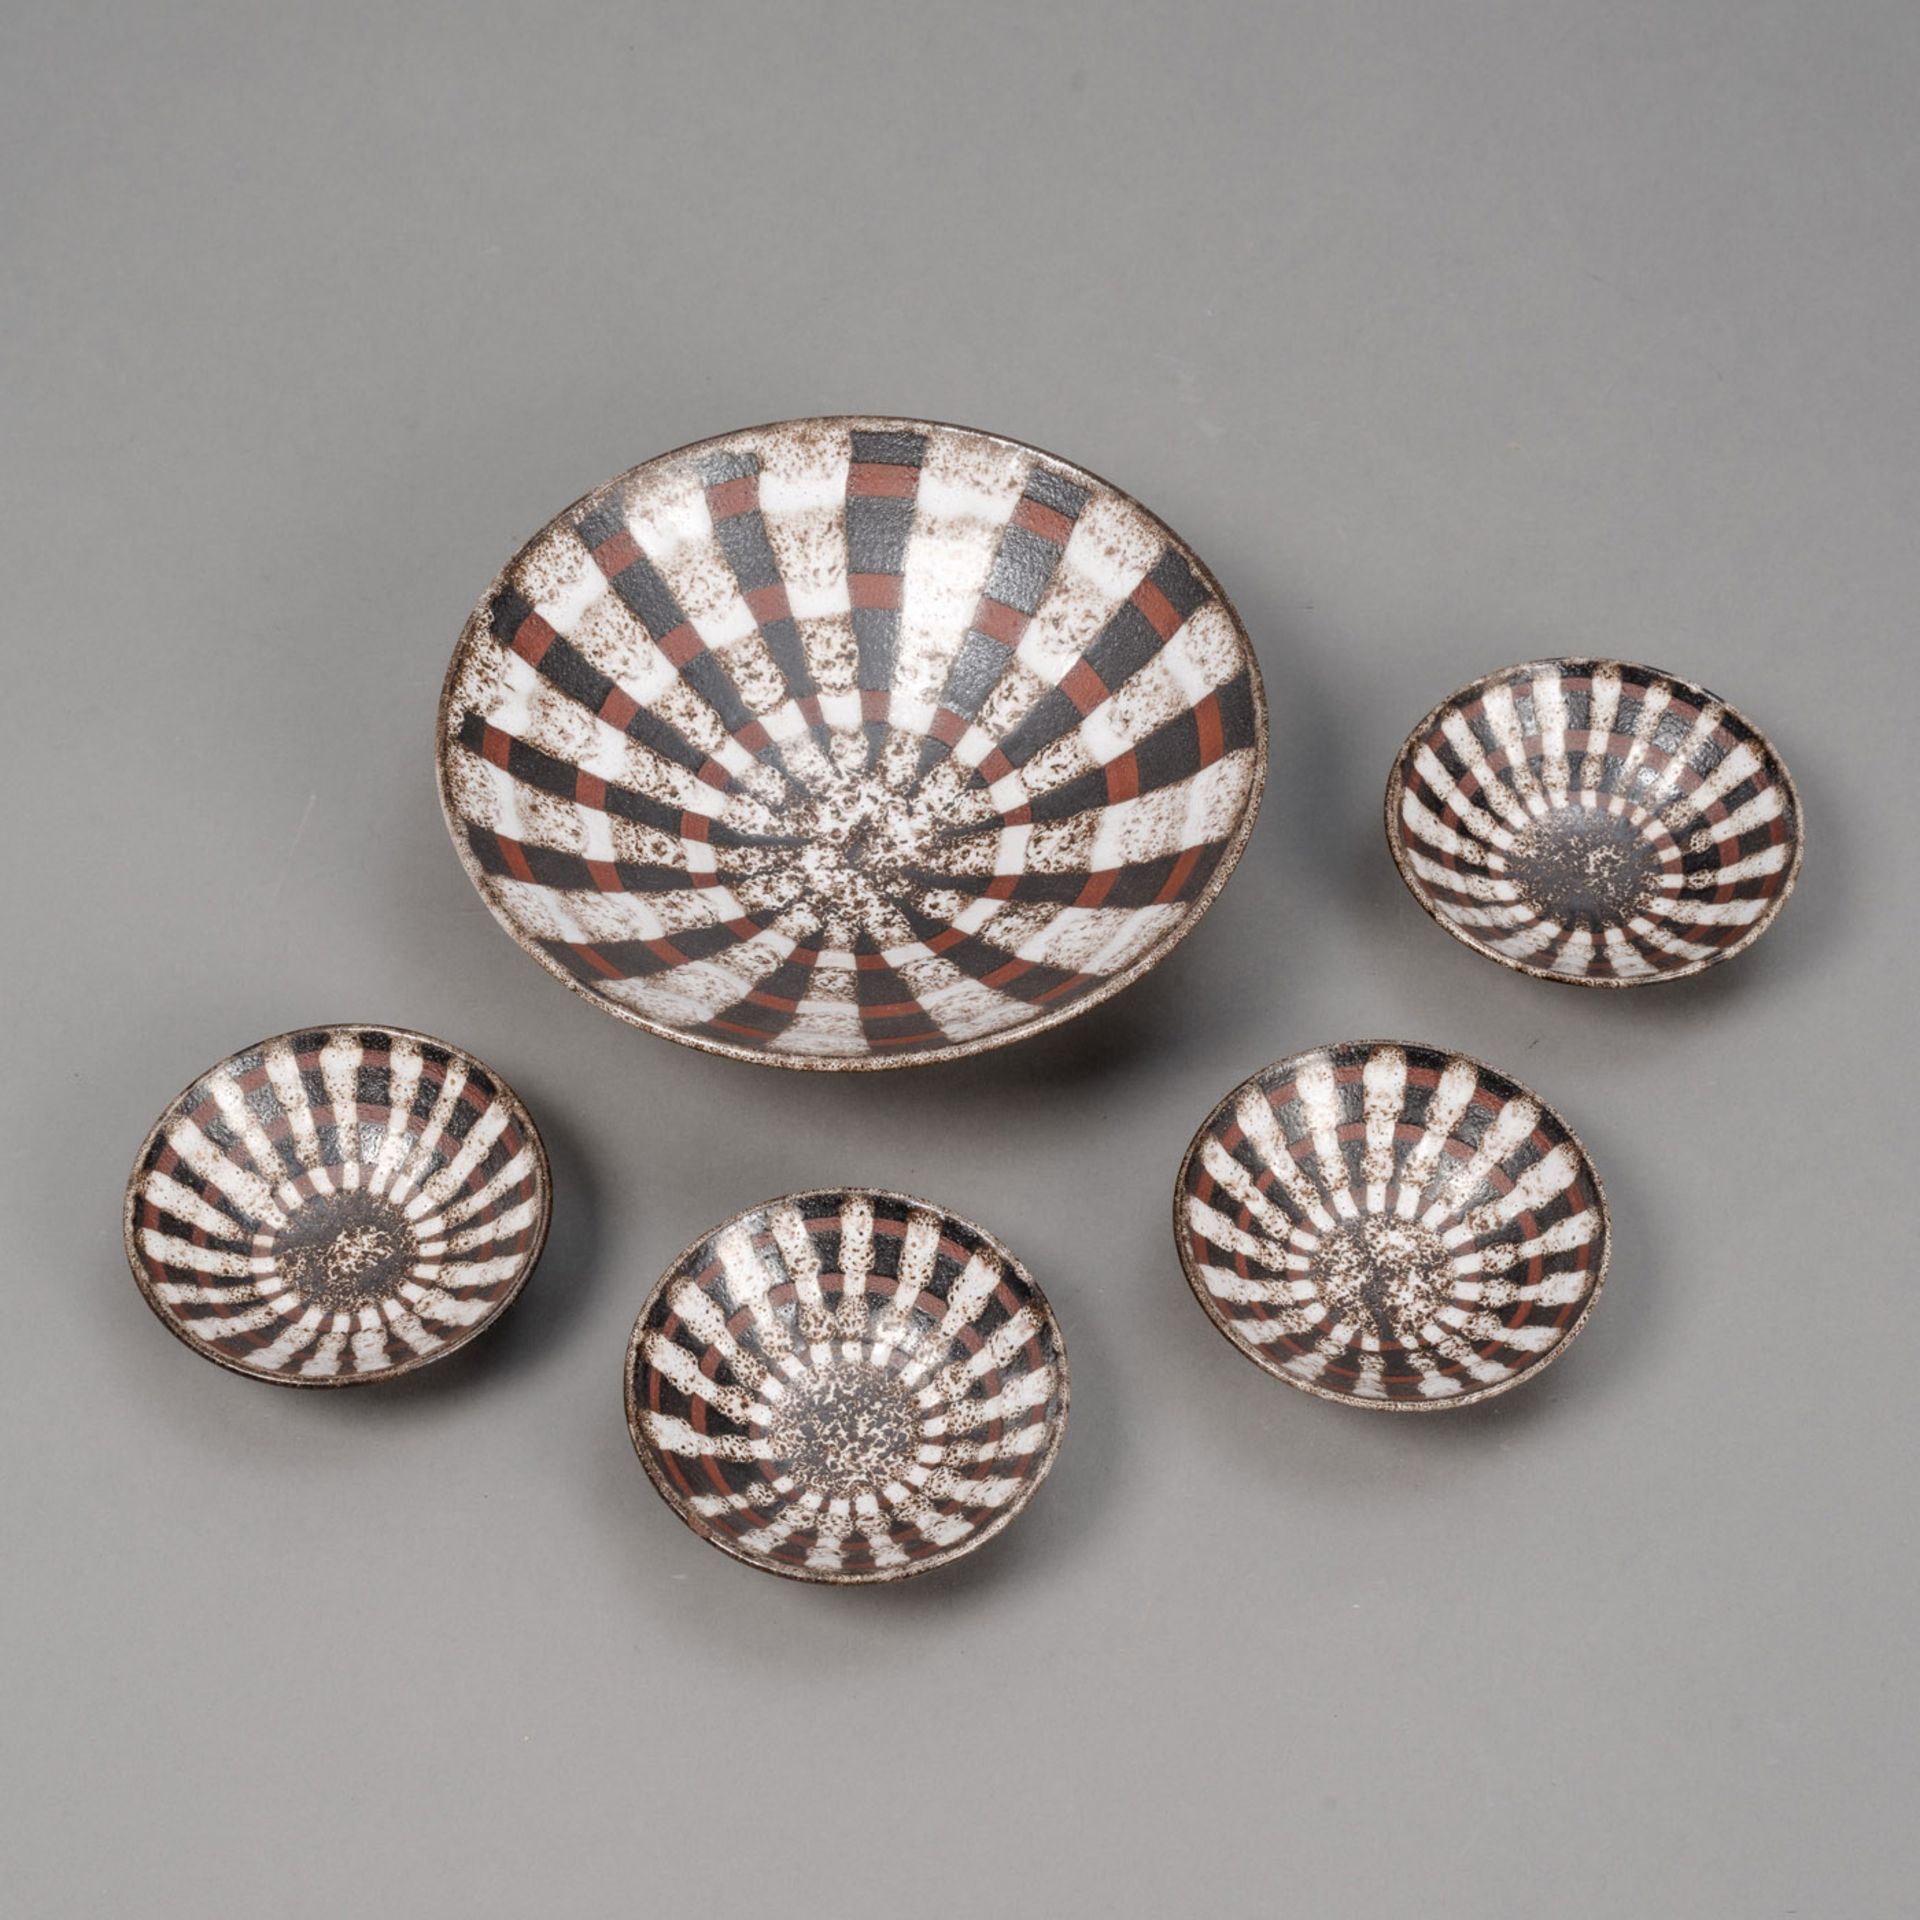 ERRATUM: GROUP OF FOUR SMALL AND ONE LARGE CERAMIC BOWLS FROM THE HAMBURG WORKSHOP OF MONIKA MAETZE